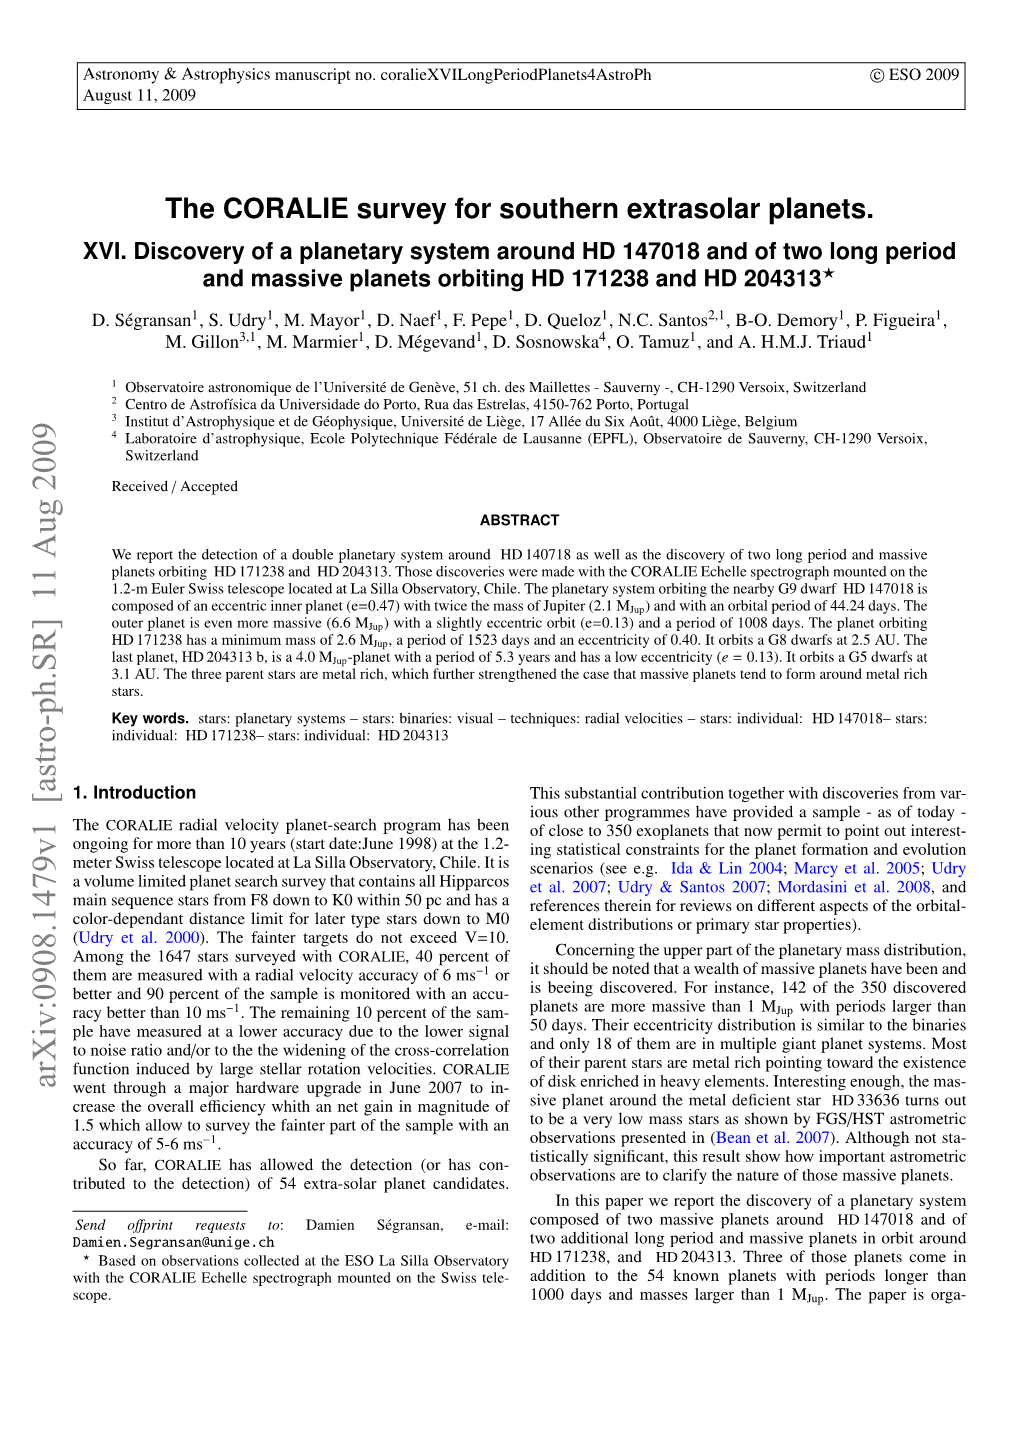 Arxiv:0908.1479V1 [Astro-Ph.SR] 11 Aug 2009 Went Through a Major Hardware Upgrade in June 2007 to In- of Disk Enriched in Heavy Elements